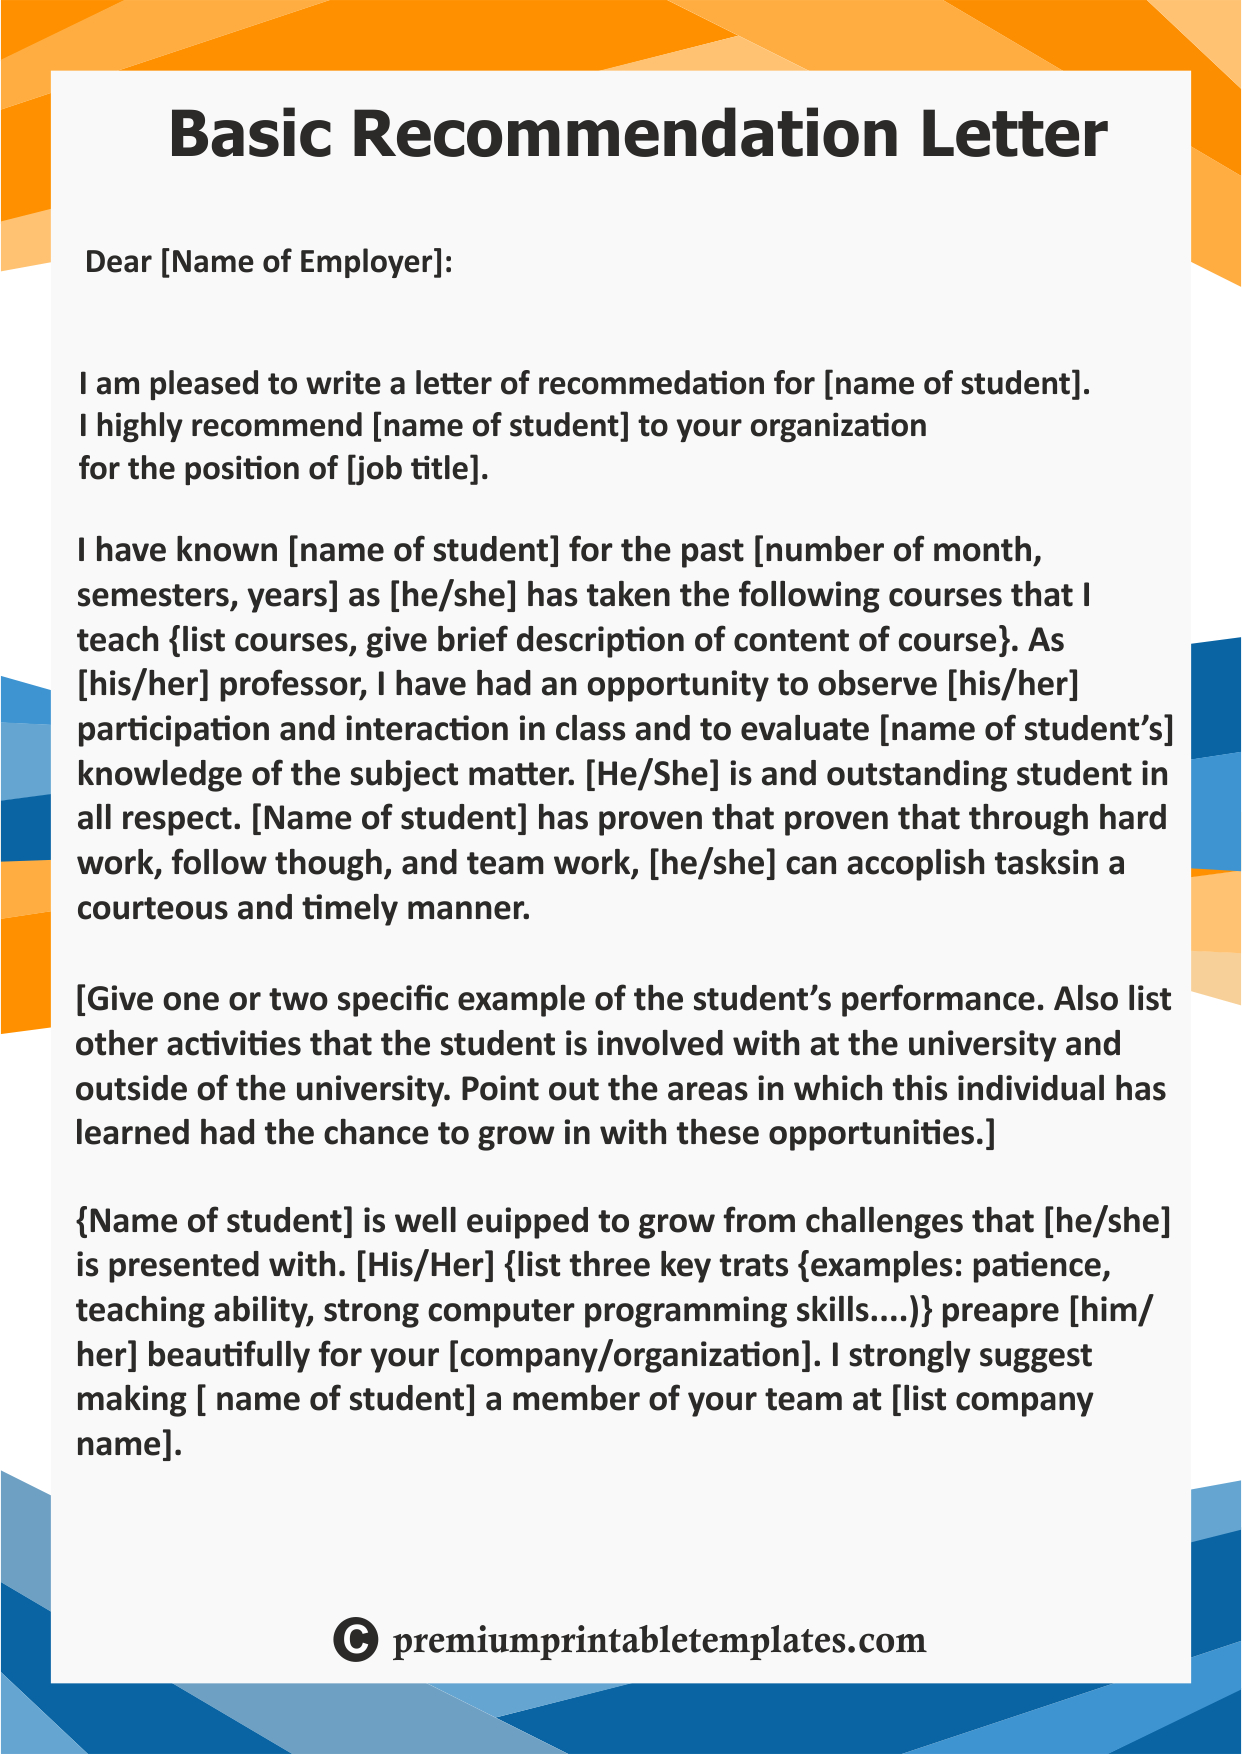 Basic Recommendation Letter Template Writing Letter Of inside proportions 1242 X 1754